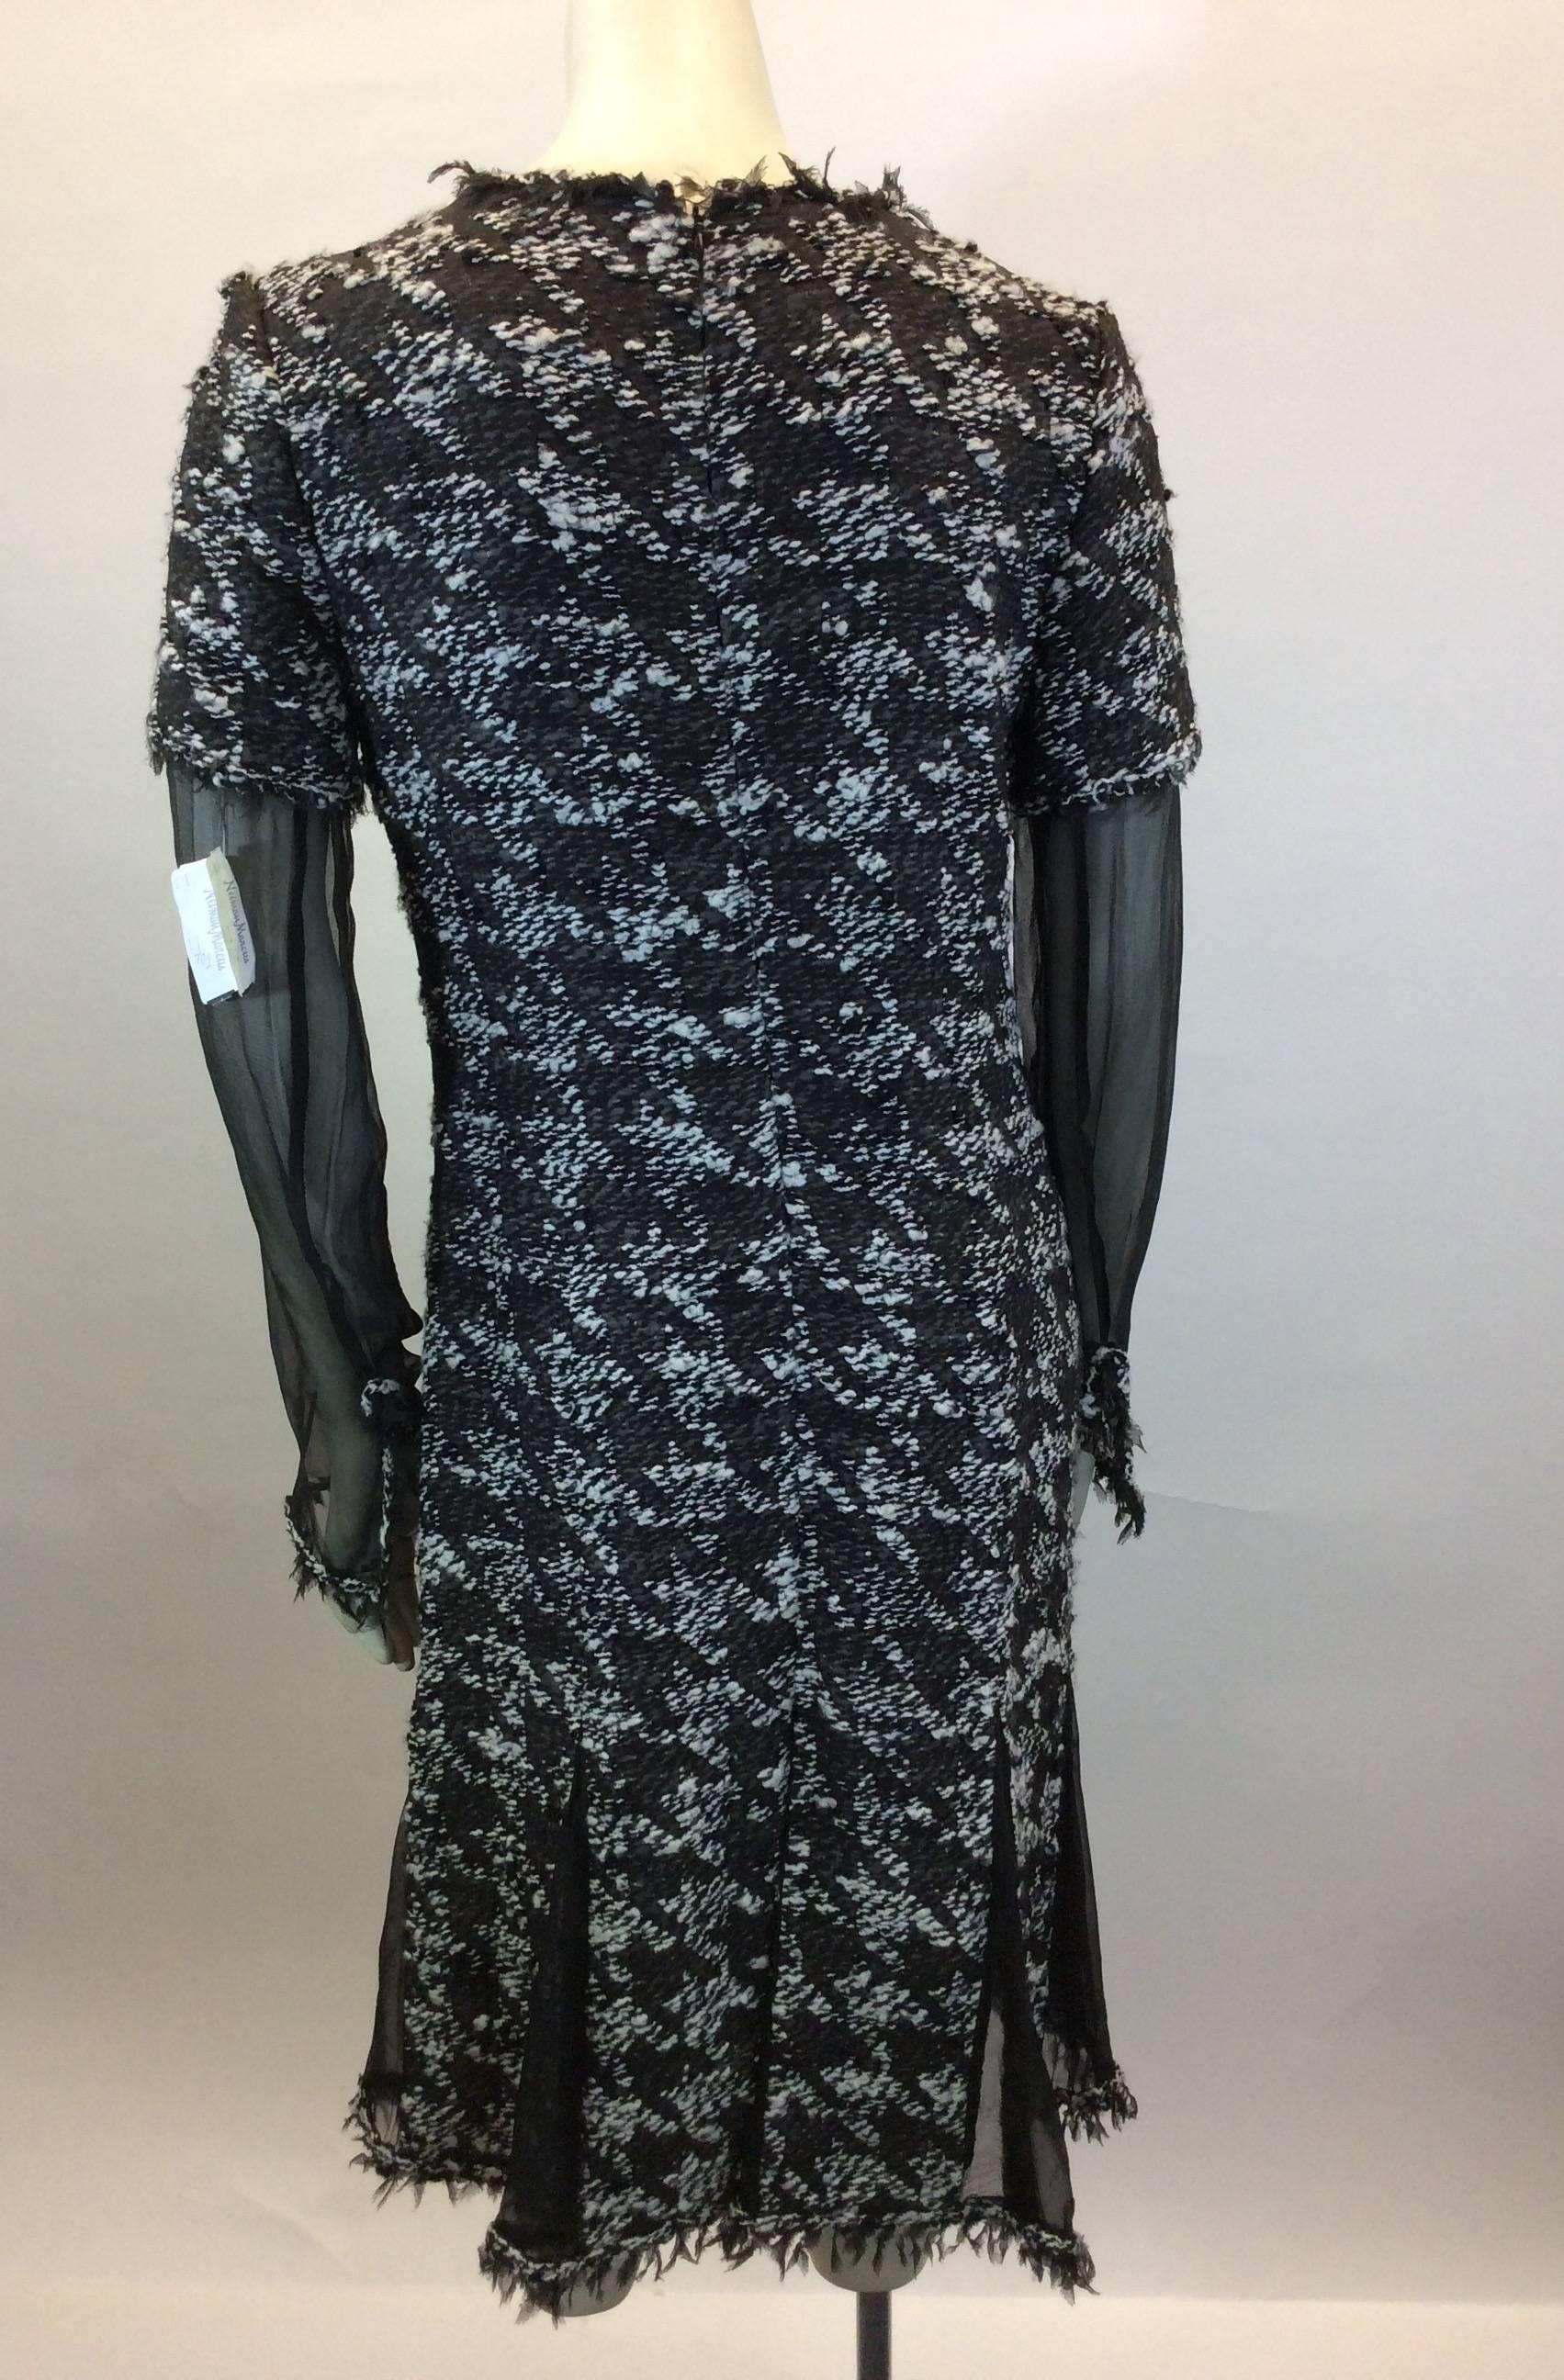 Women's Chanel Black and White Houndstooth Tweed Dress with Sheer Sleeves For Sale